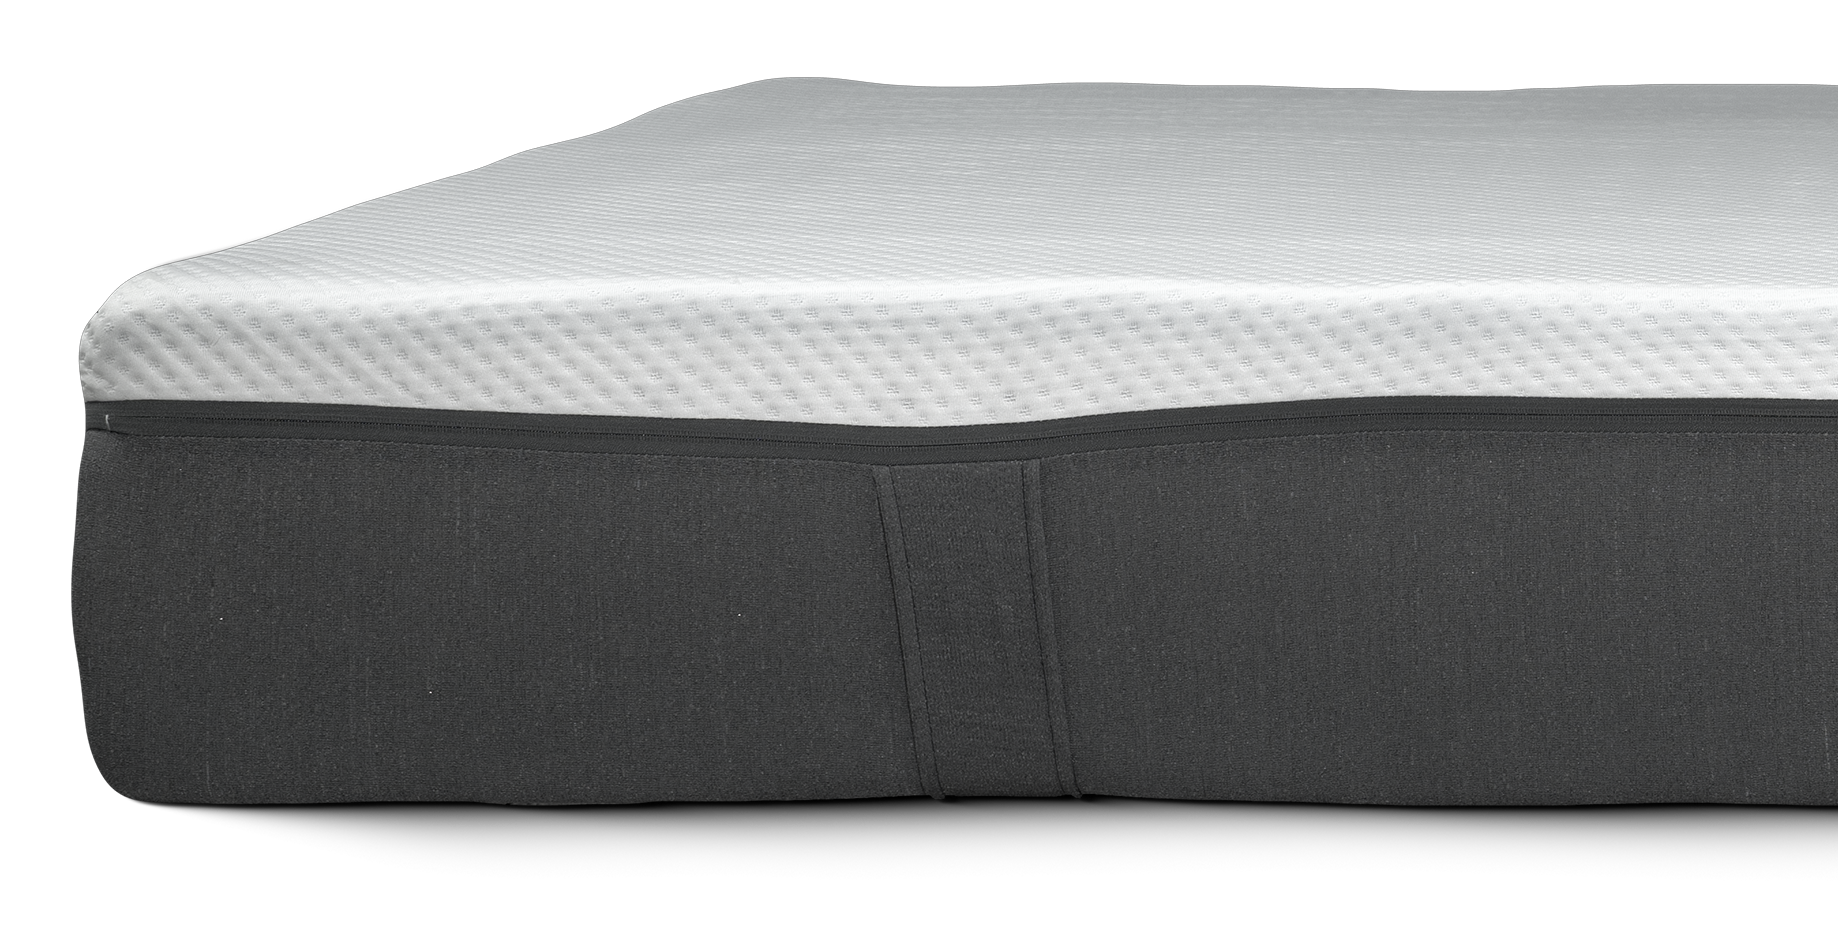 Photo of the side of the Emma Hybrid mattress.